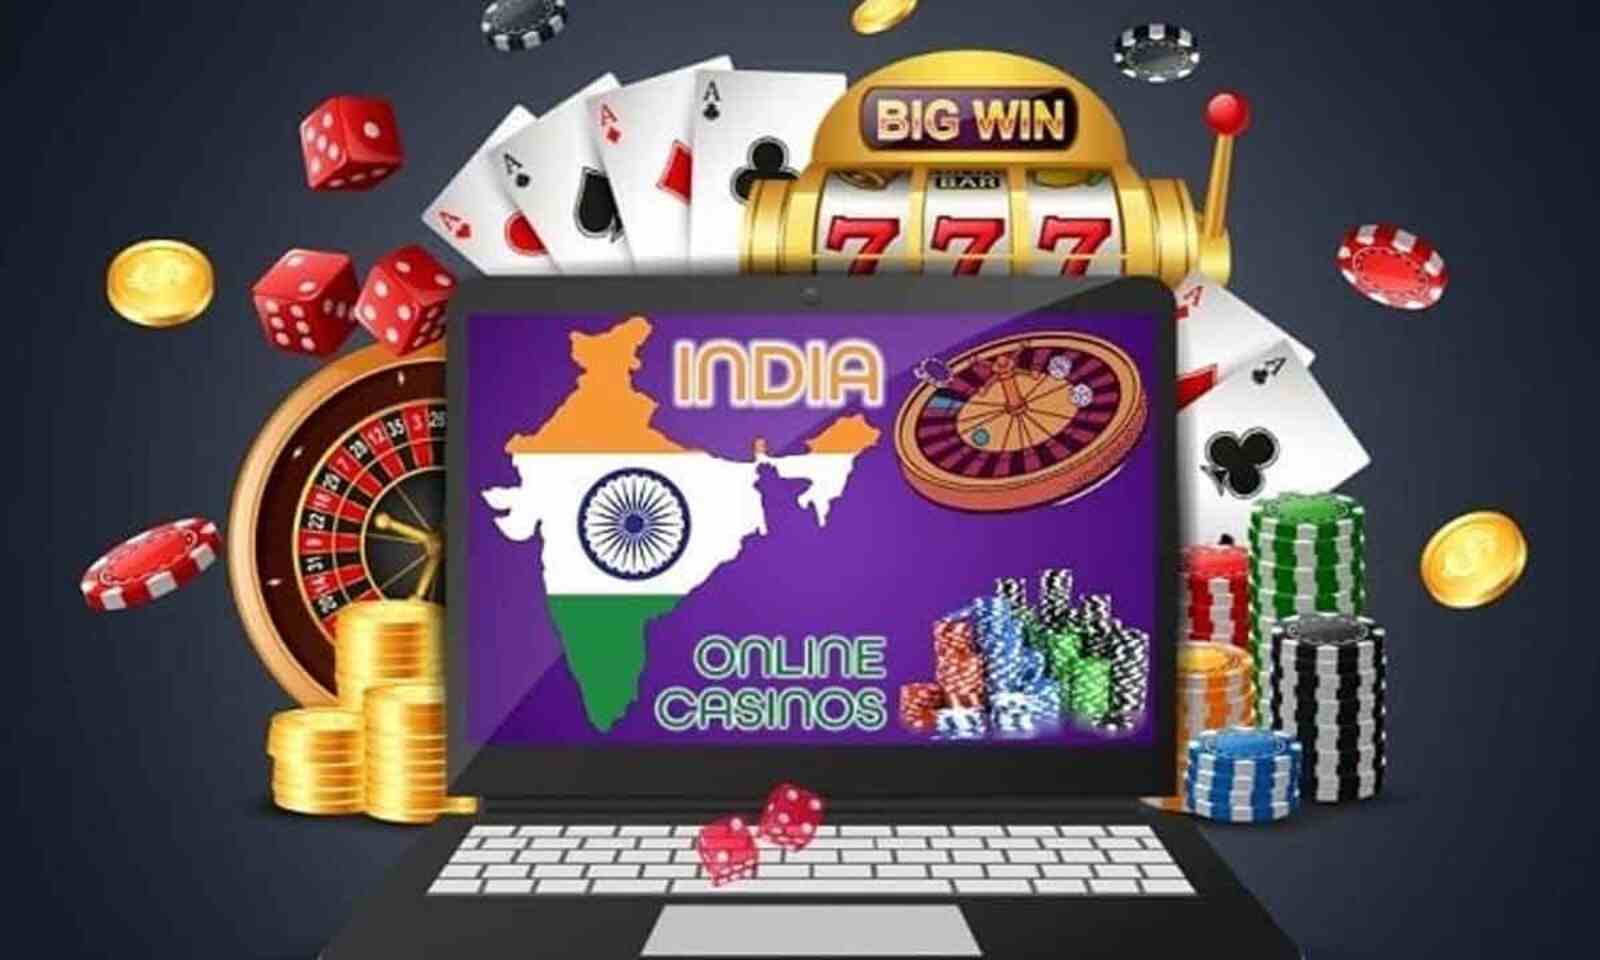 Don't Be Fooled By Strategies for Winning at Indian Online Casinos